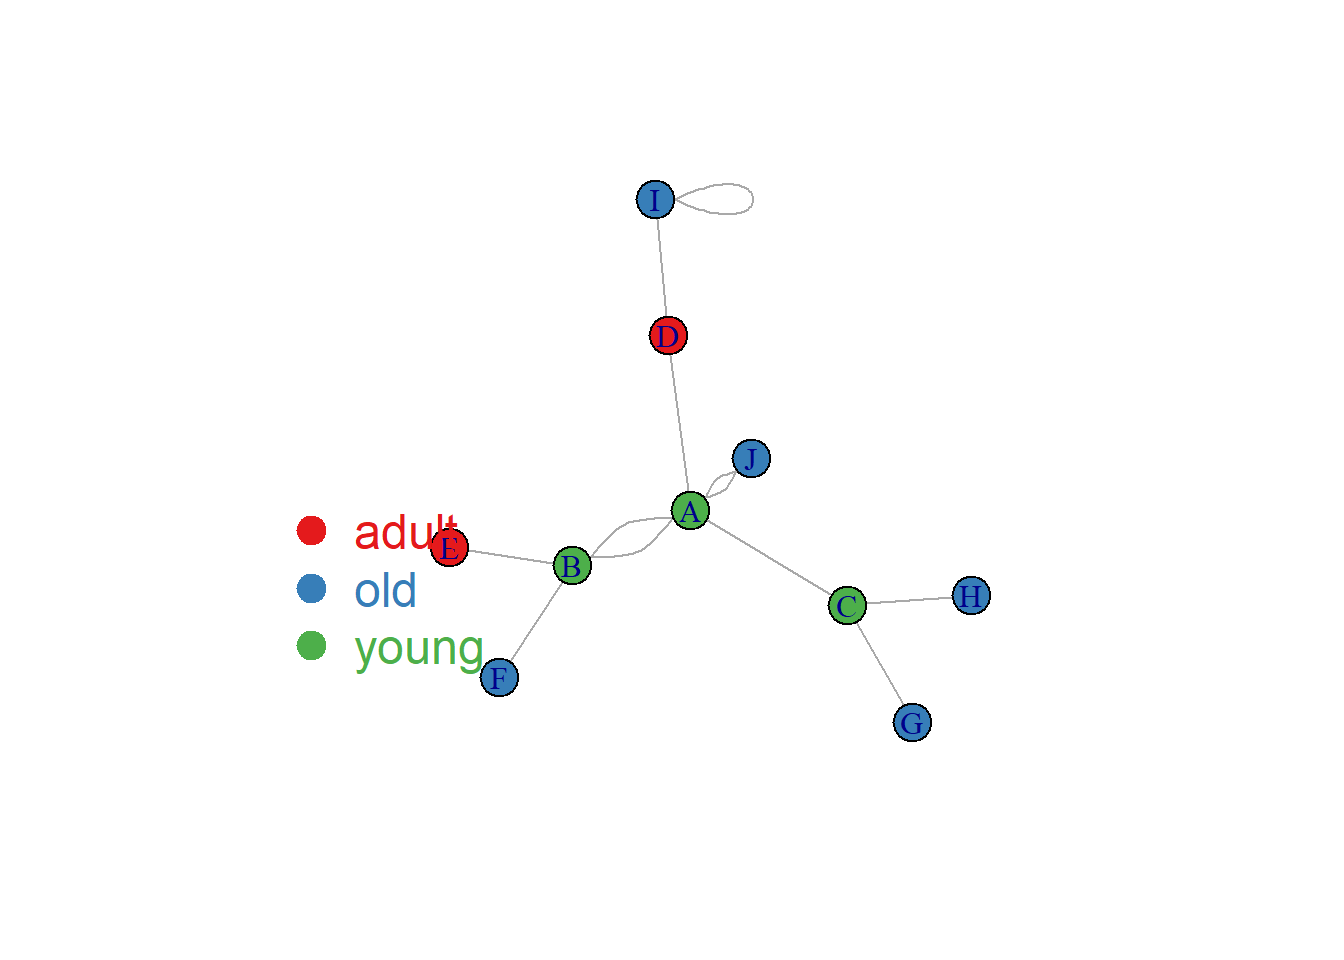 d3.js - Hiding text elements in D3 chord diagram - Stack Overflow